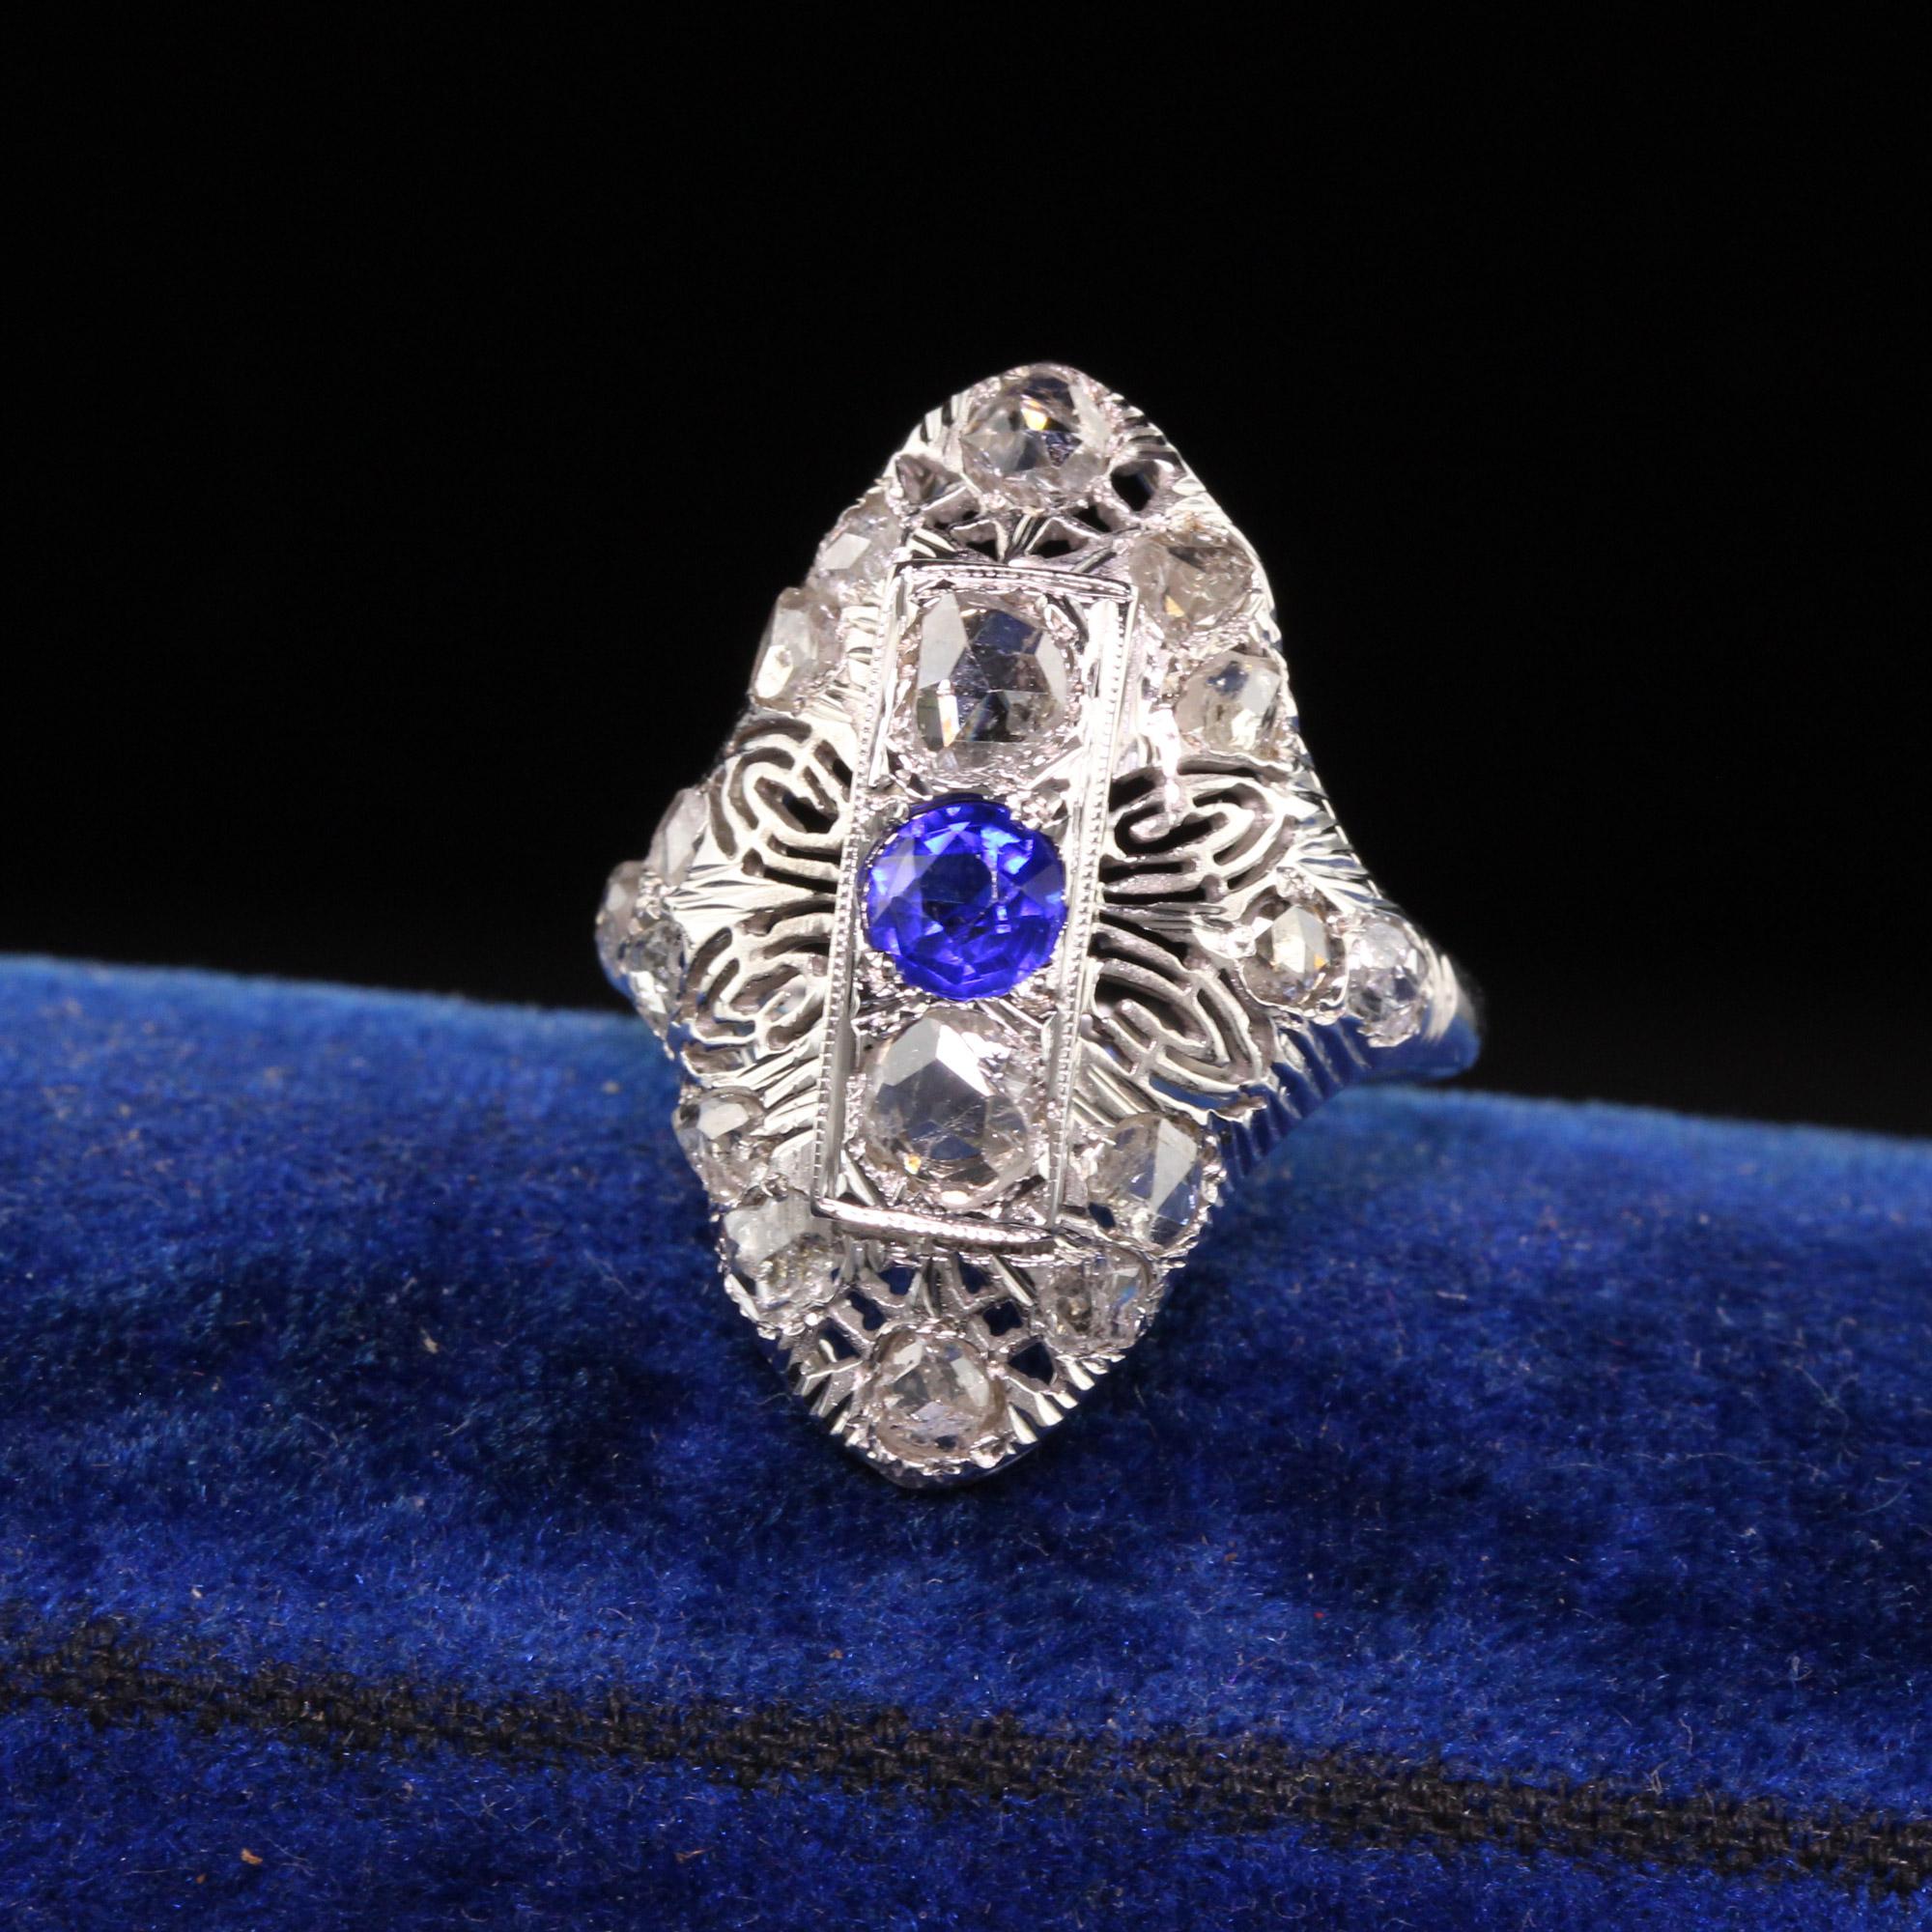 Beautiful Antique Art Deco 14K White Gold Rose Cut Diamond Filigree Shield Ring. This beautiful ring is crafted in 14k white gold. There are beautiful rose cut diamonds set in an Art Deco mounting with a synthetic sapphire in the center which was